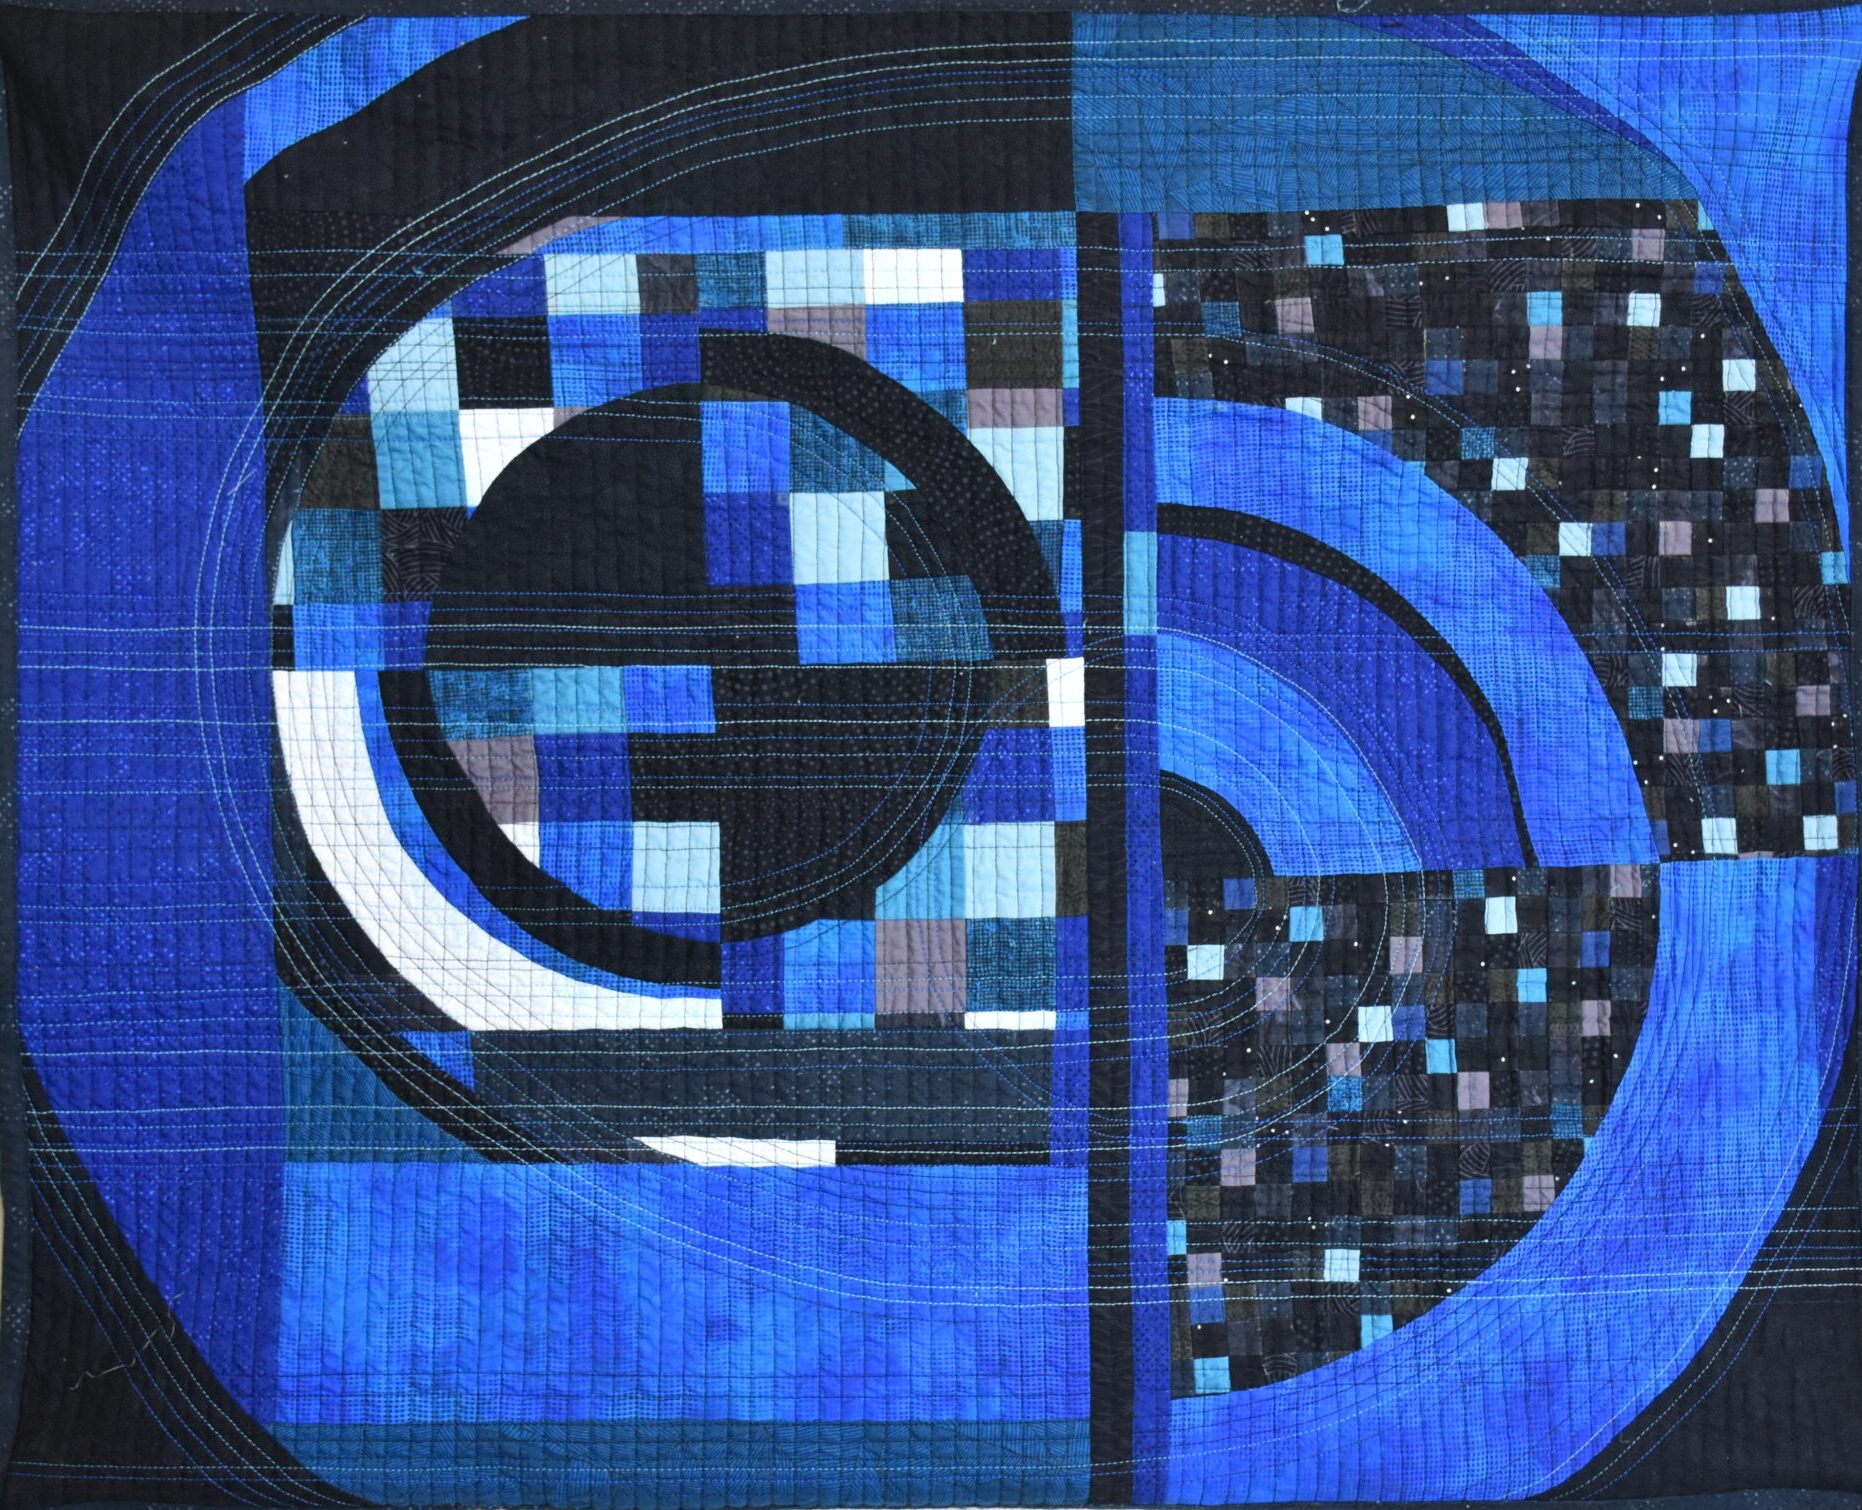 Quilt in shades of blue, black and white